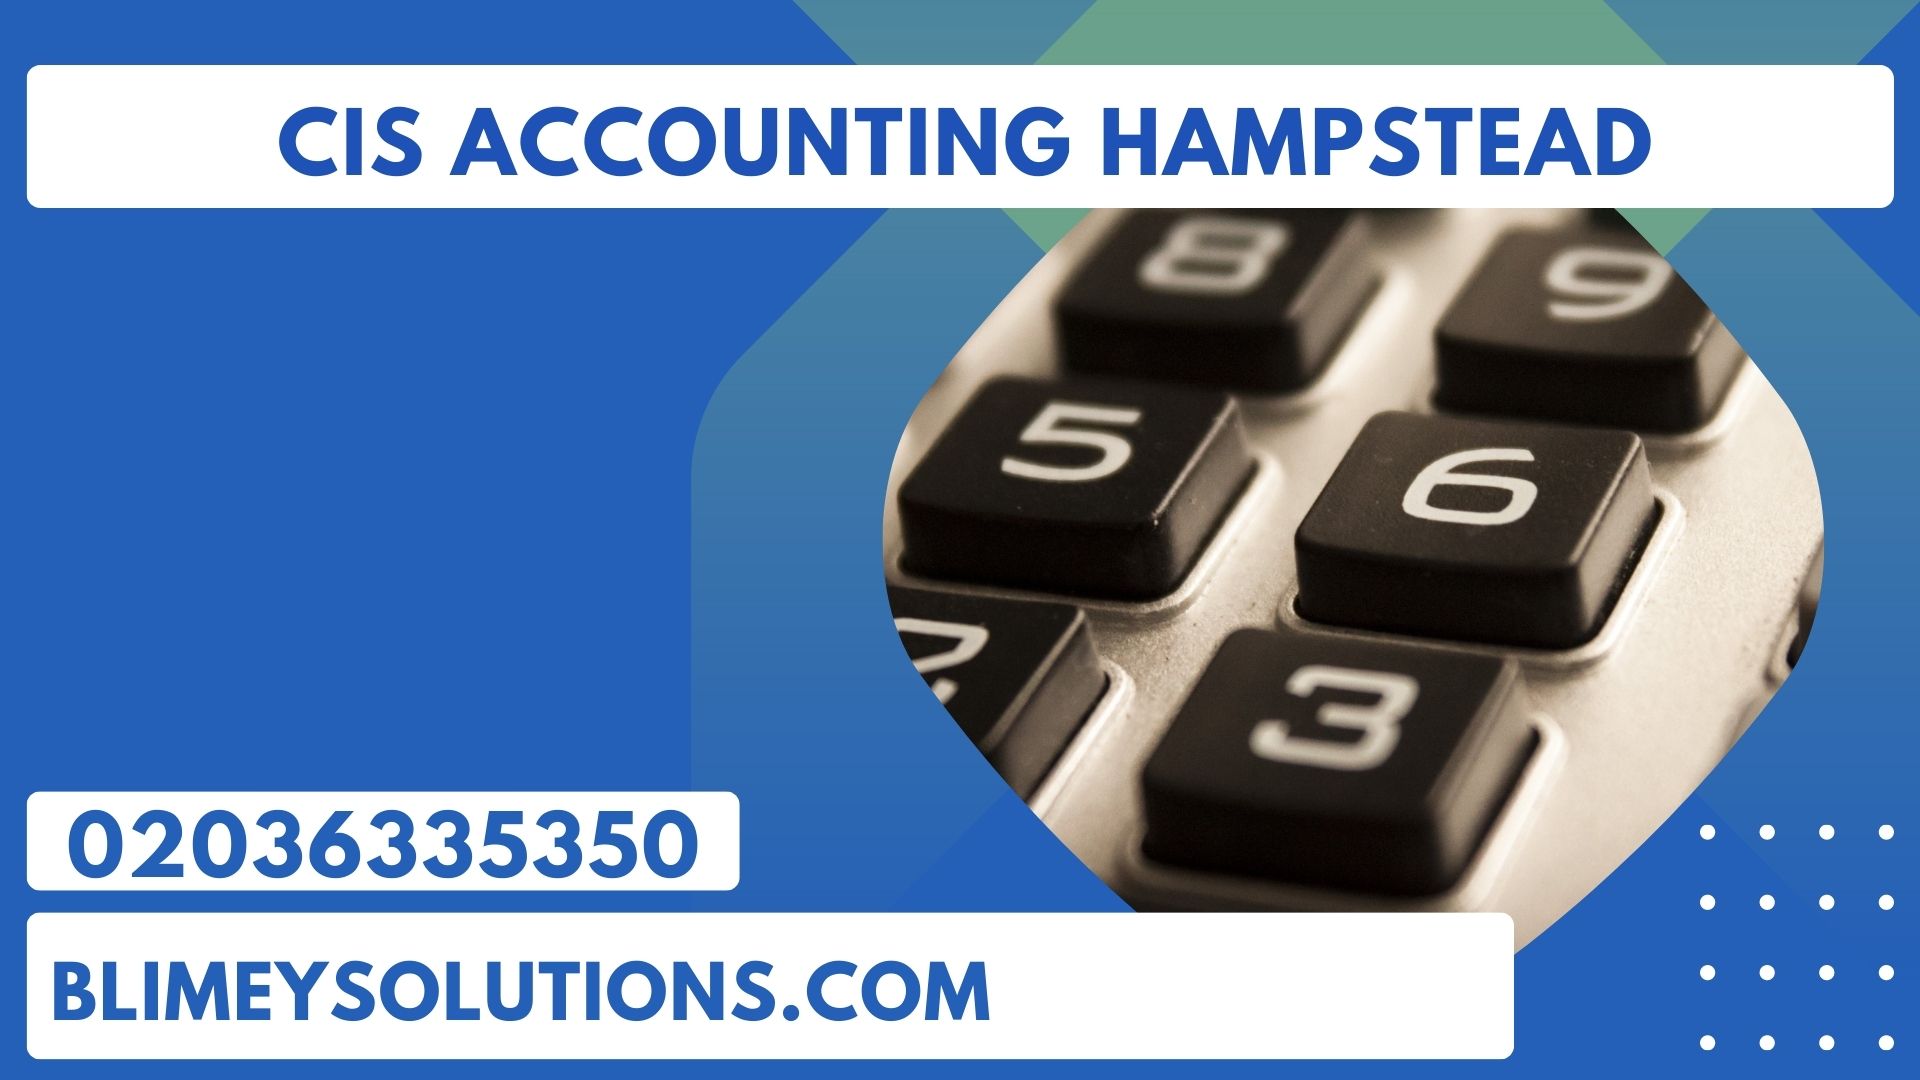 CIS Accounting in Hampstead NW3 London